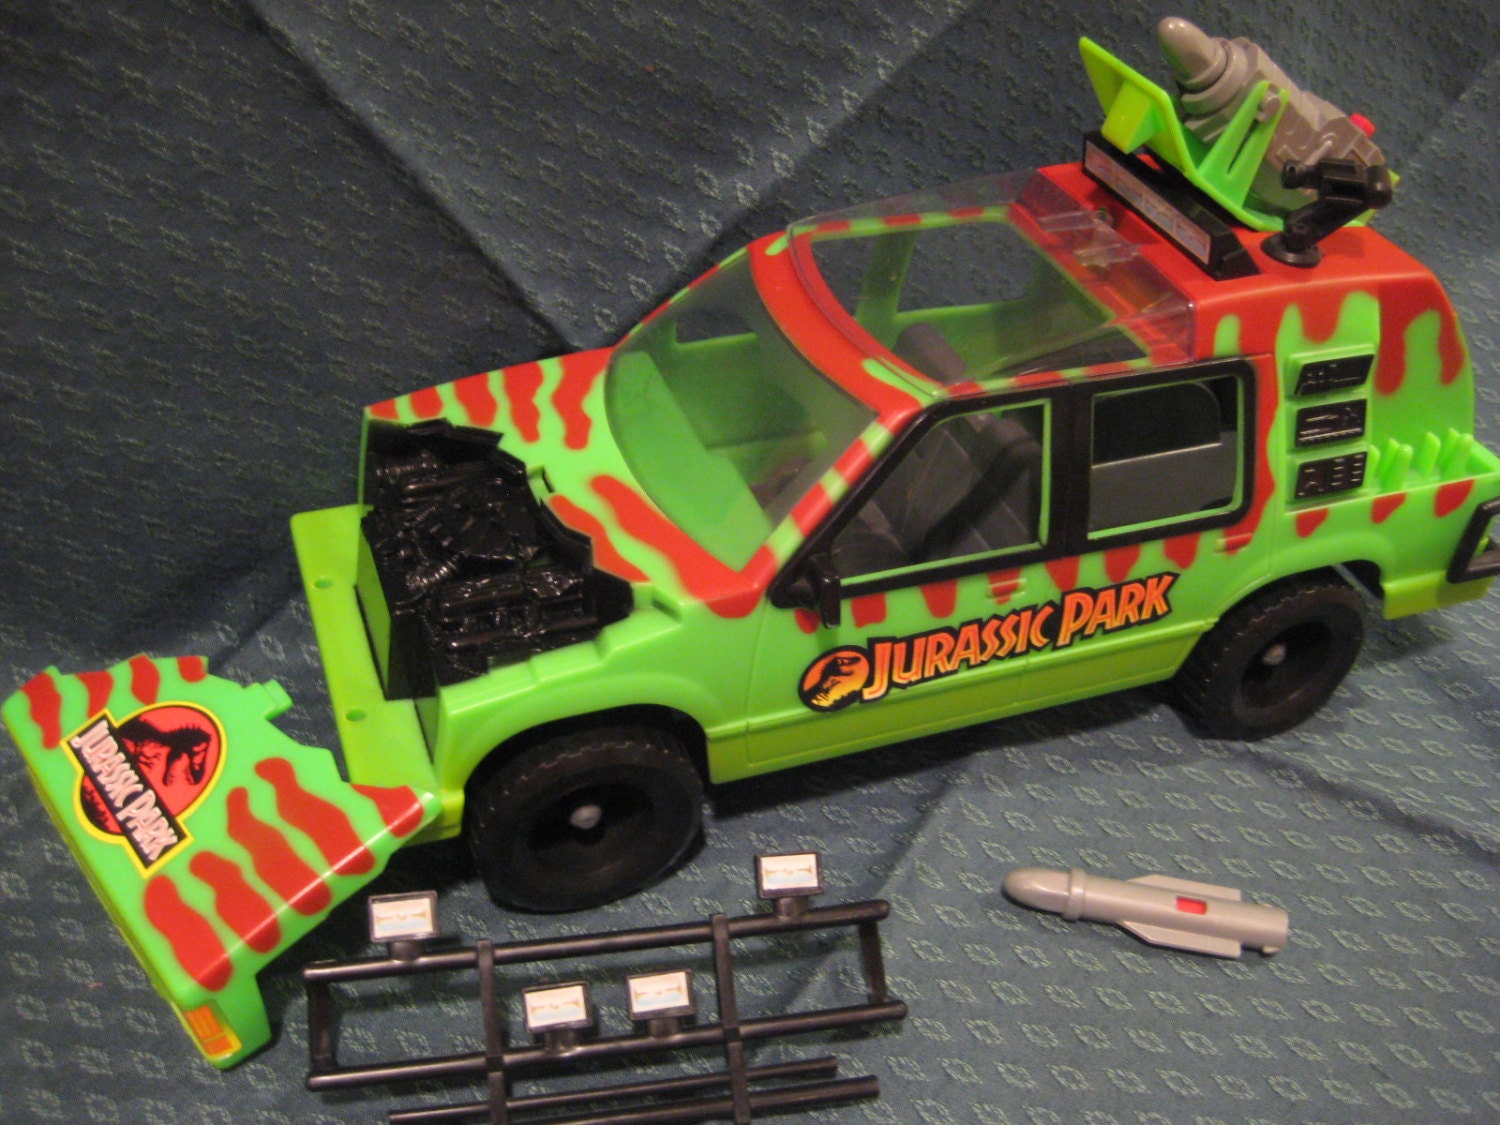 Jurassic Park Jungle Explorer Green Vehicle Complete With All 